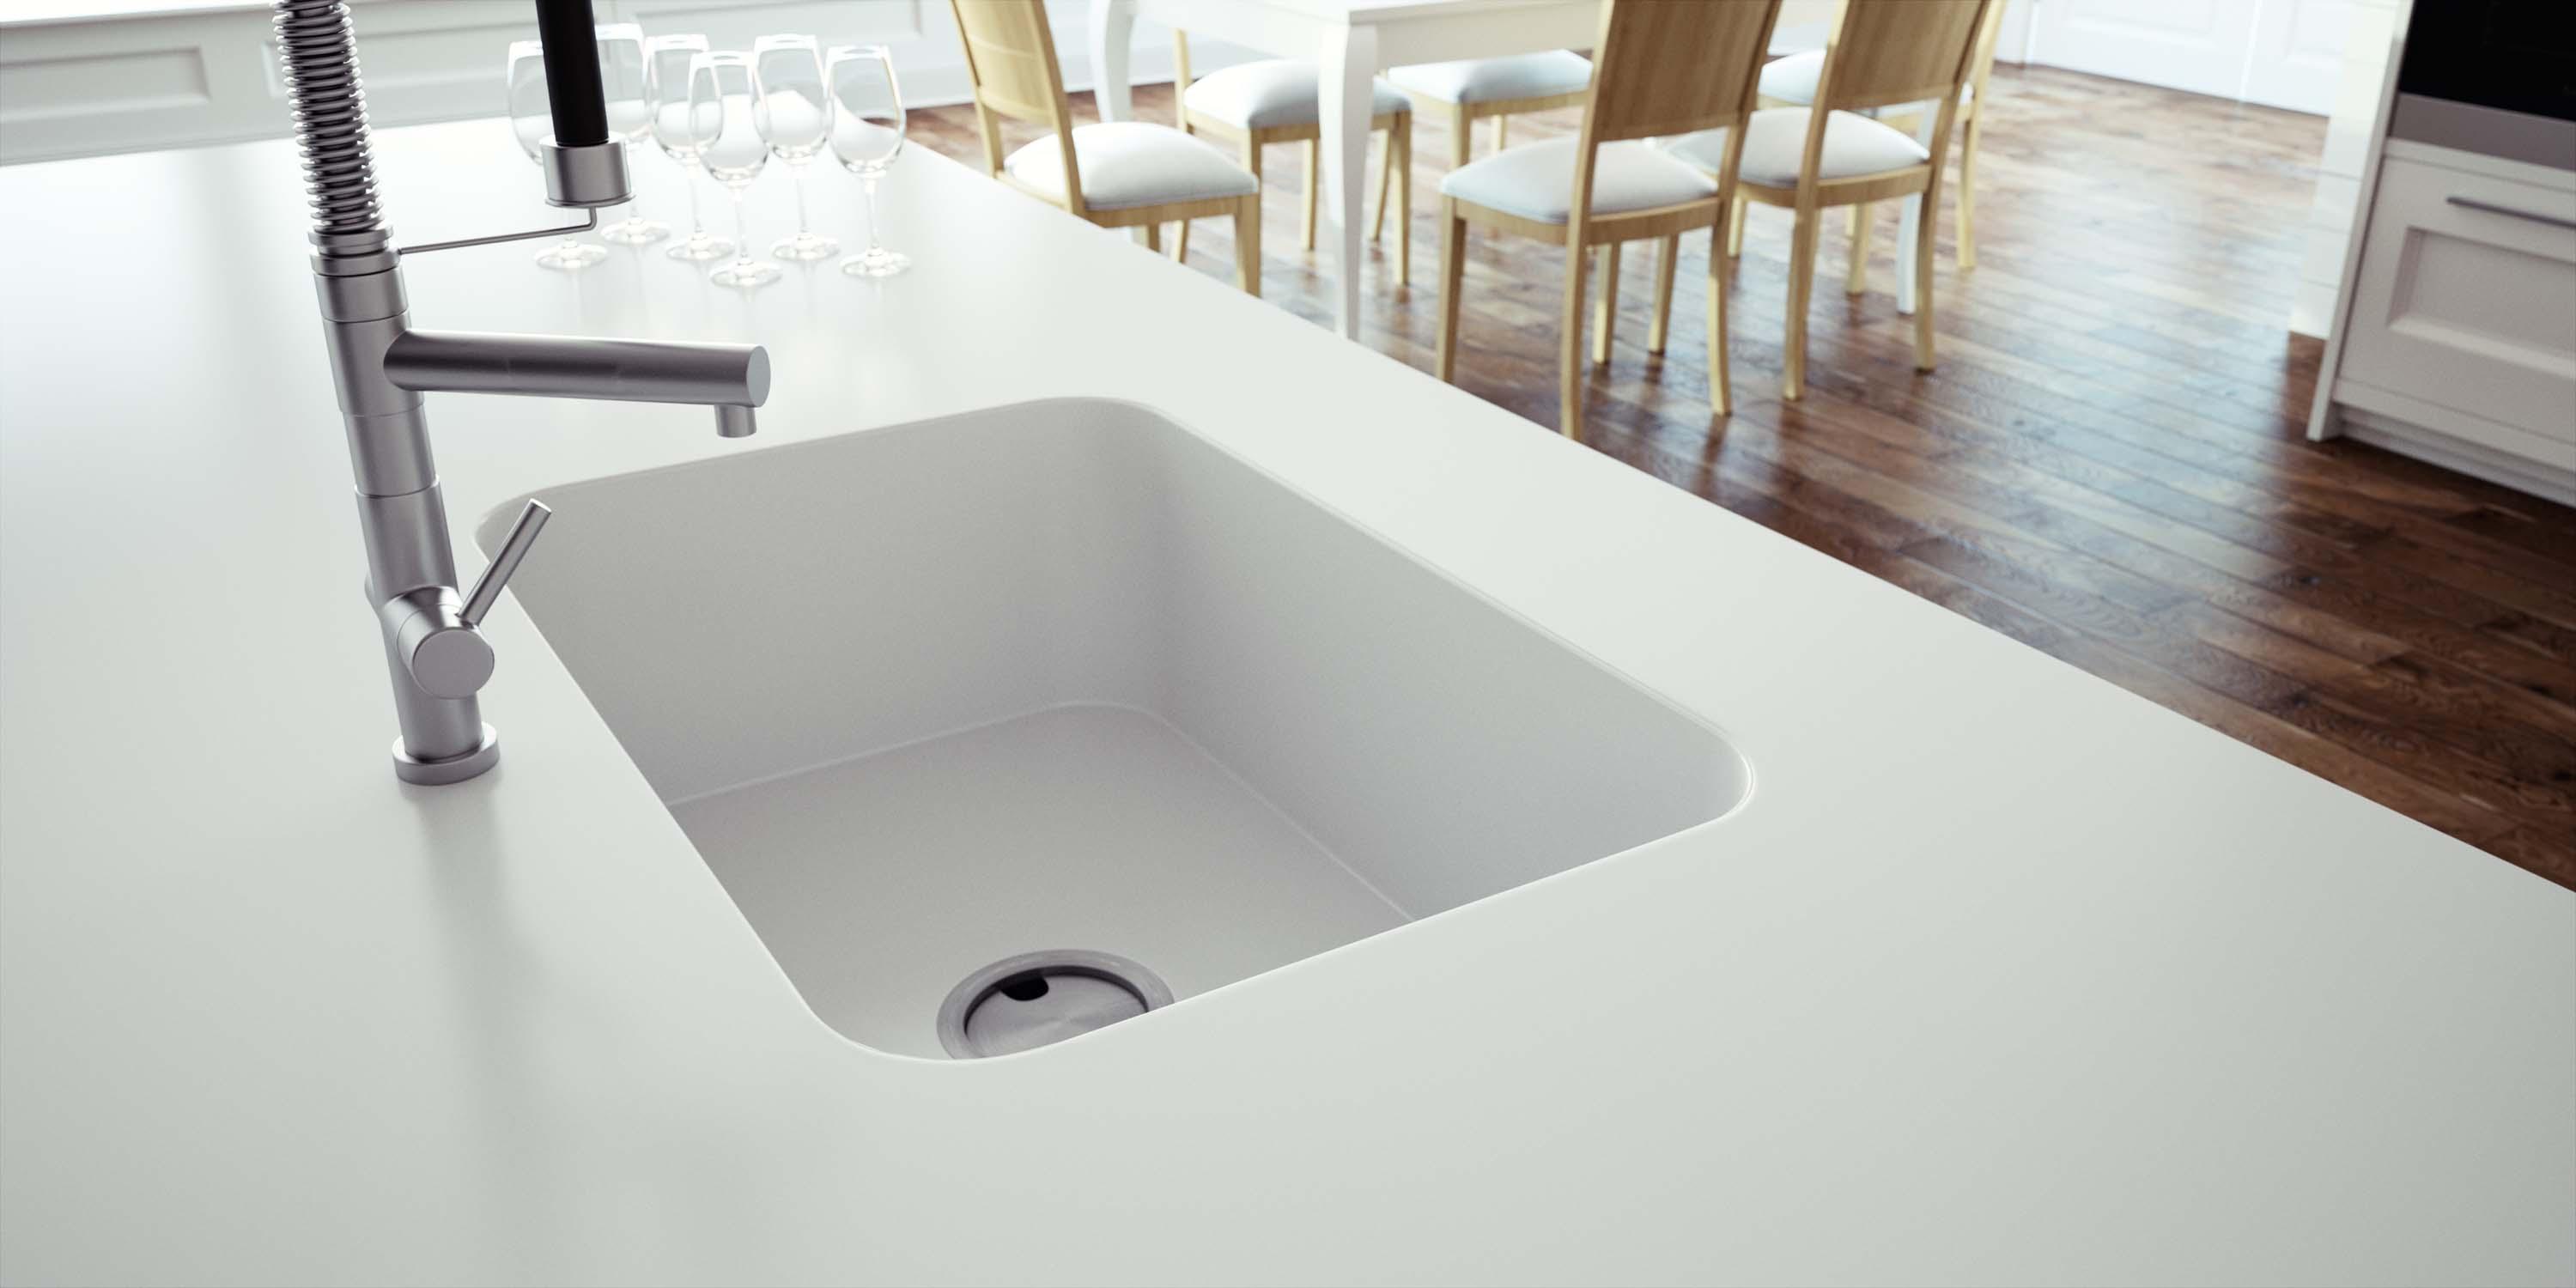 Silestone Integrity Top Kitchen Sinks From Cosentino